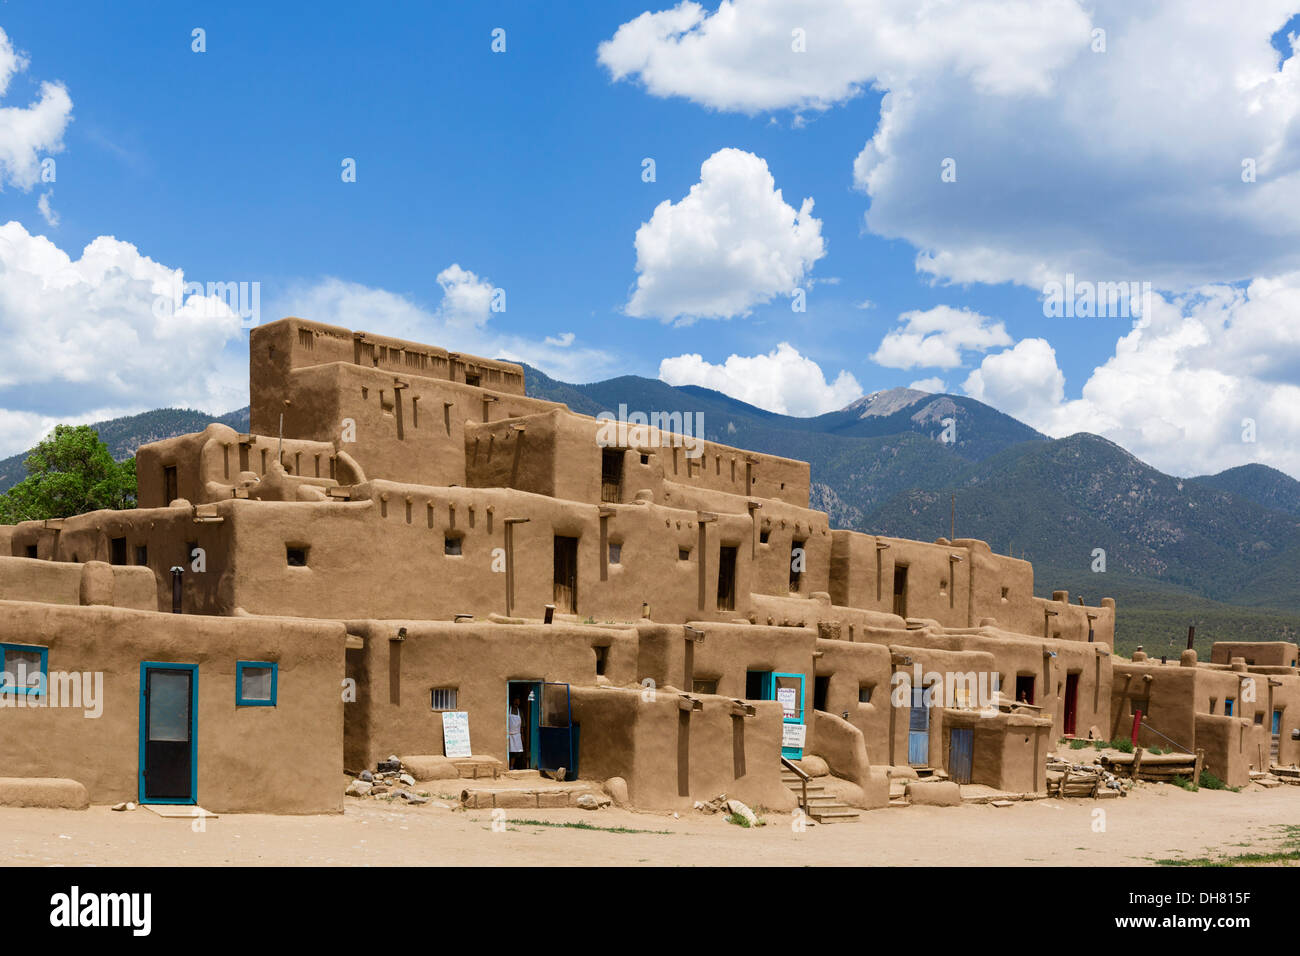 The Hlaauma (North House) native american dwellings in historic Taos Pueblo, Taos, New Mexico, USA Stock Photo